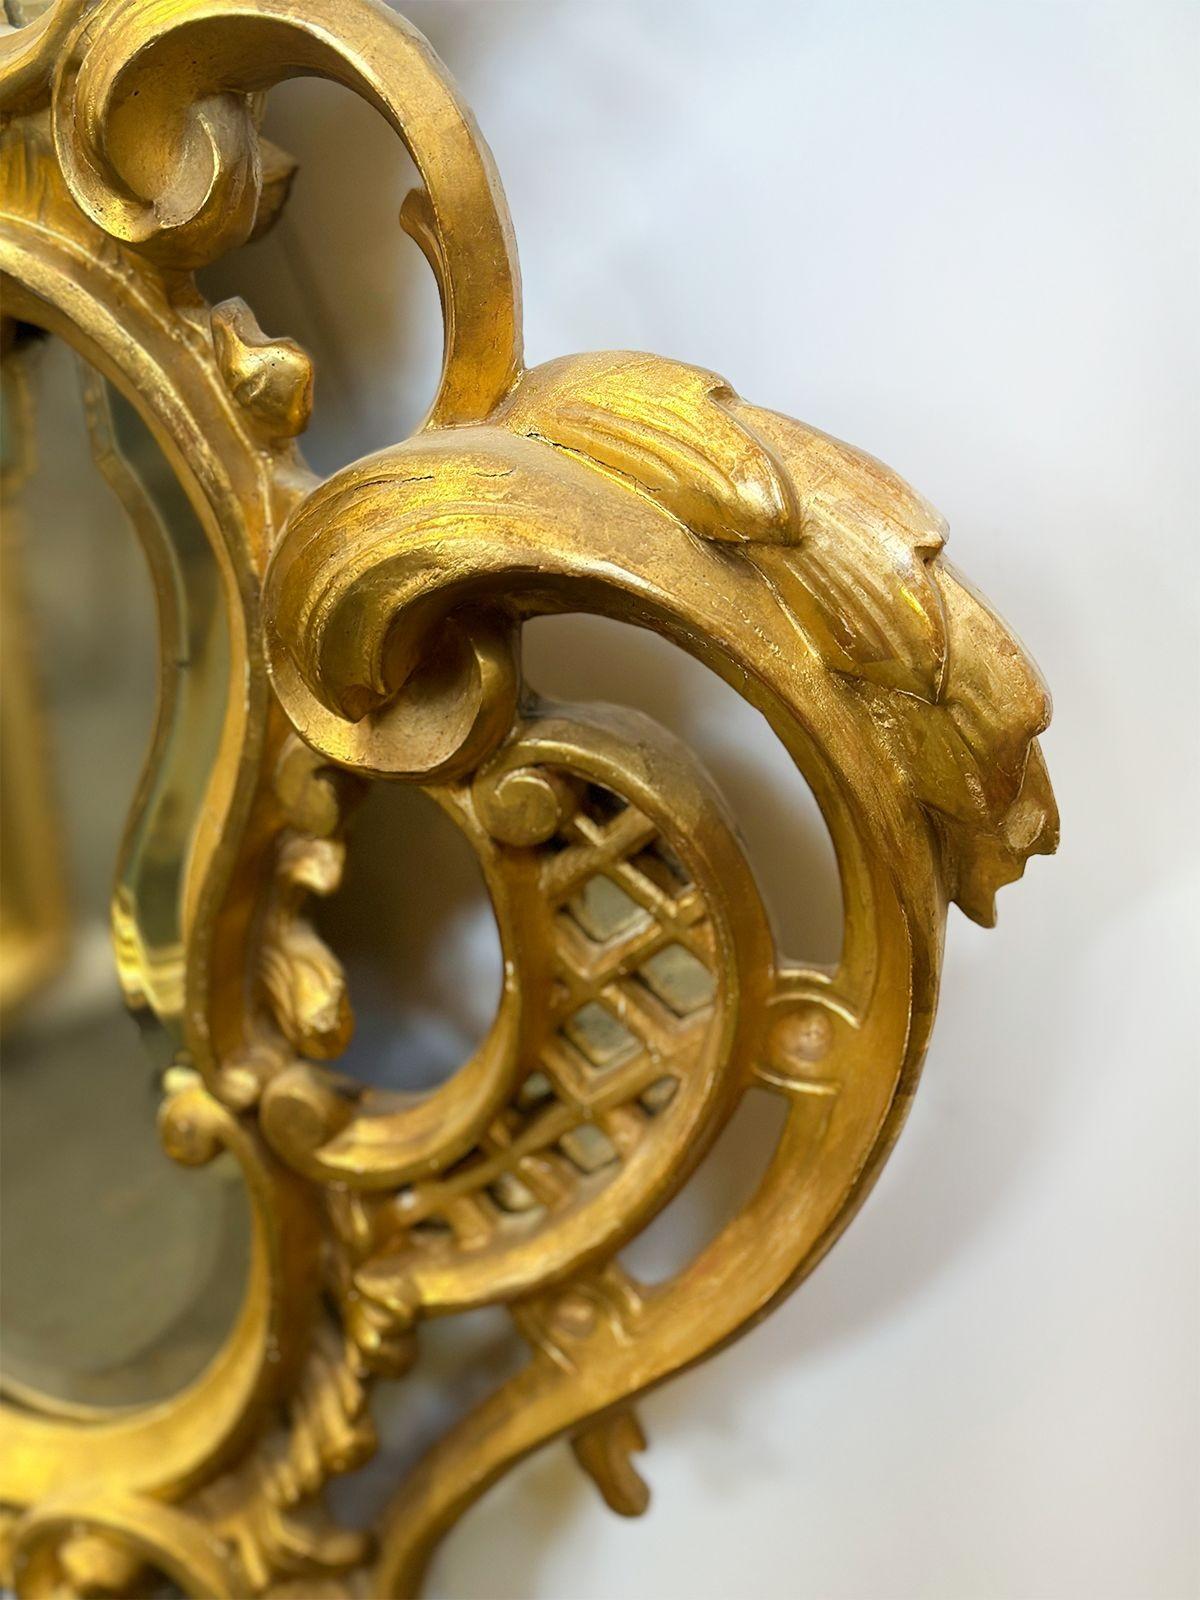 Pair of beautiful hand carved giltwood mirrors; made in Italy in the c. 1900's. The frames of these mirrors are resplendent with hand-carved giltwood, beautifully adorned with intricate foliate motifs. These motifs, with their graceful curves and